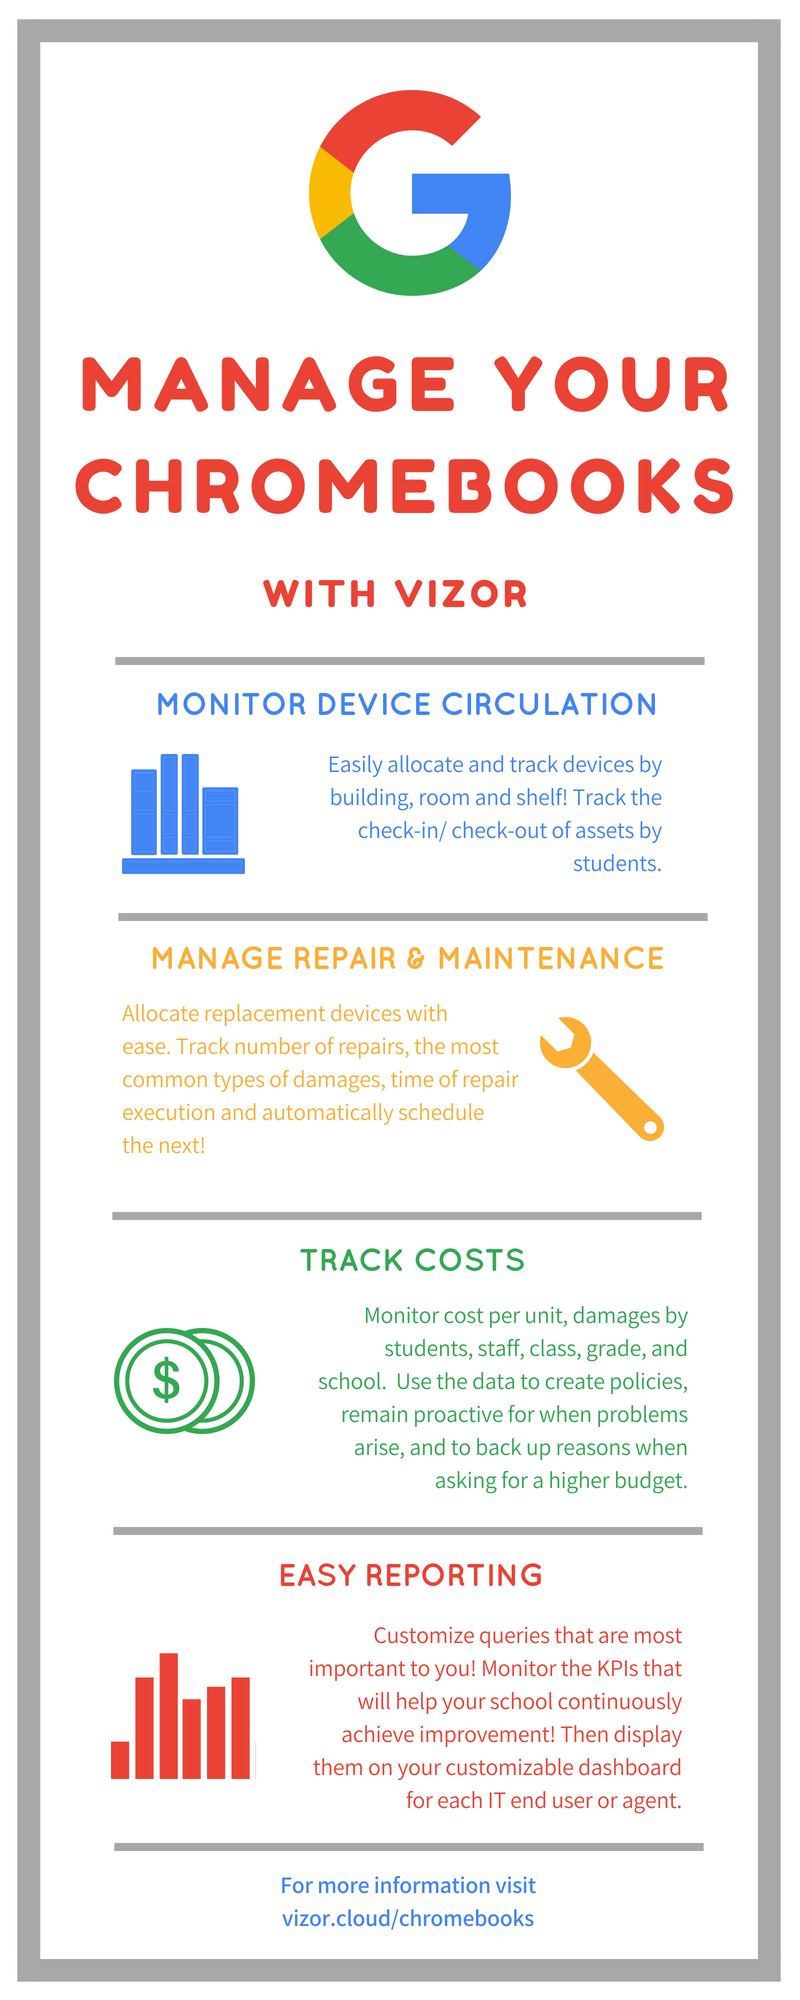 Manage Your Chromebooks with VIZOR (Infographic)